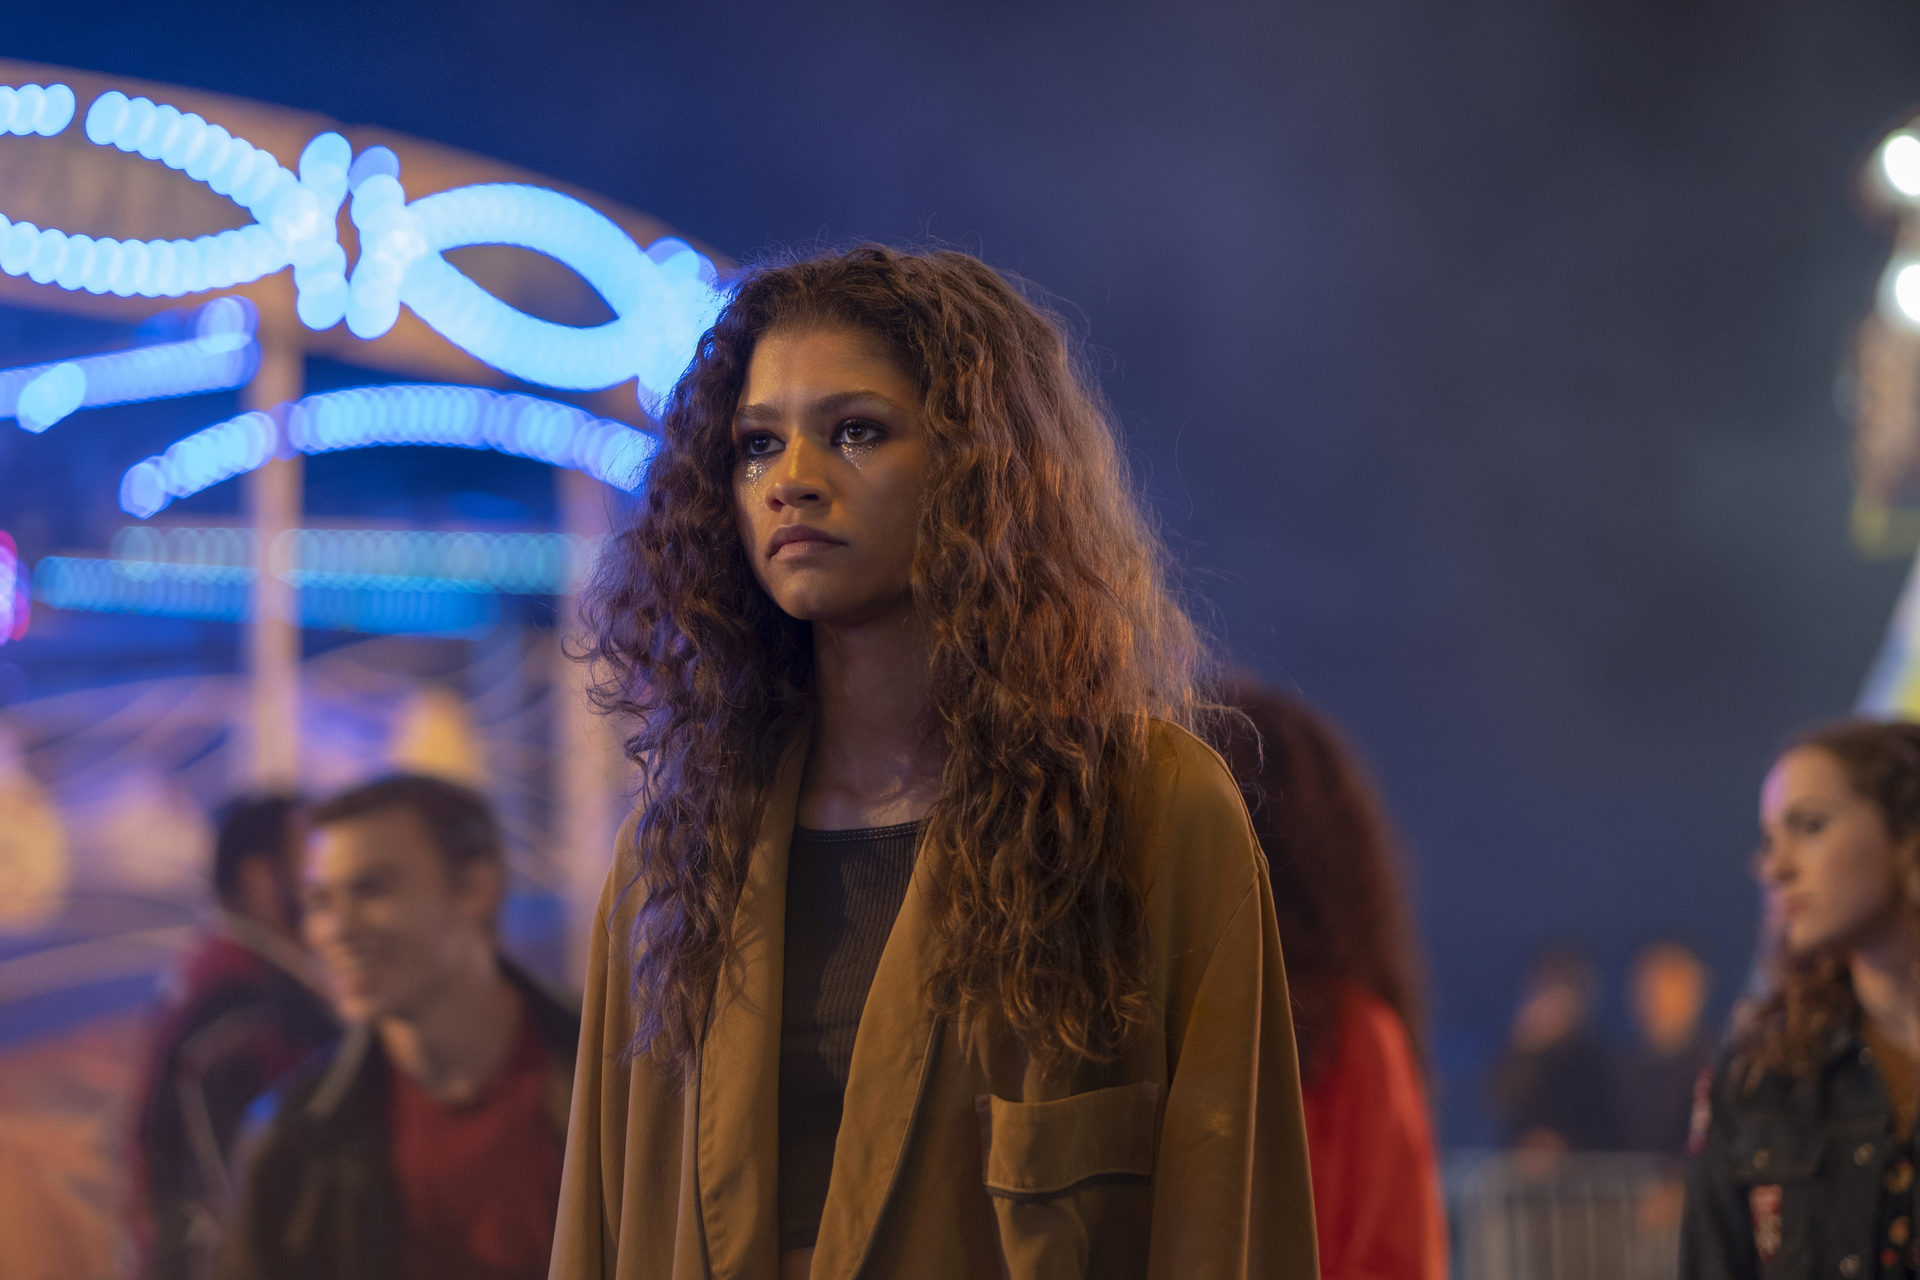 Zendaya has reportedly negotiated a new contract with HBO for Euphoria that would make her one of the highest-paid actresses in Hollywood.